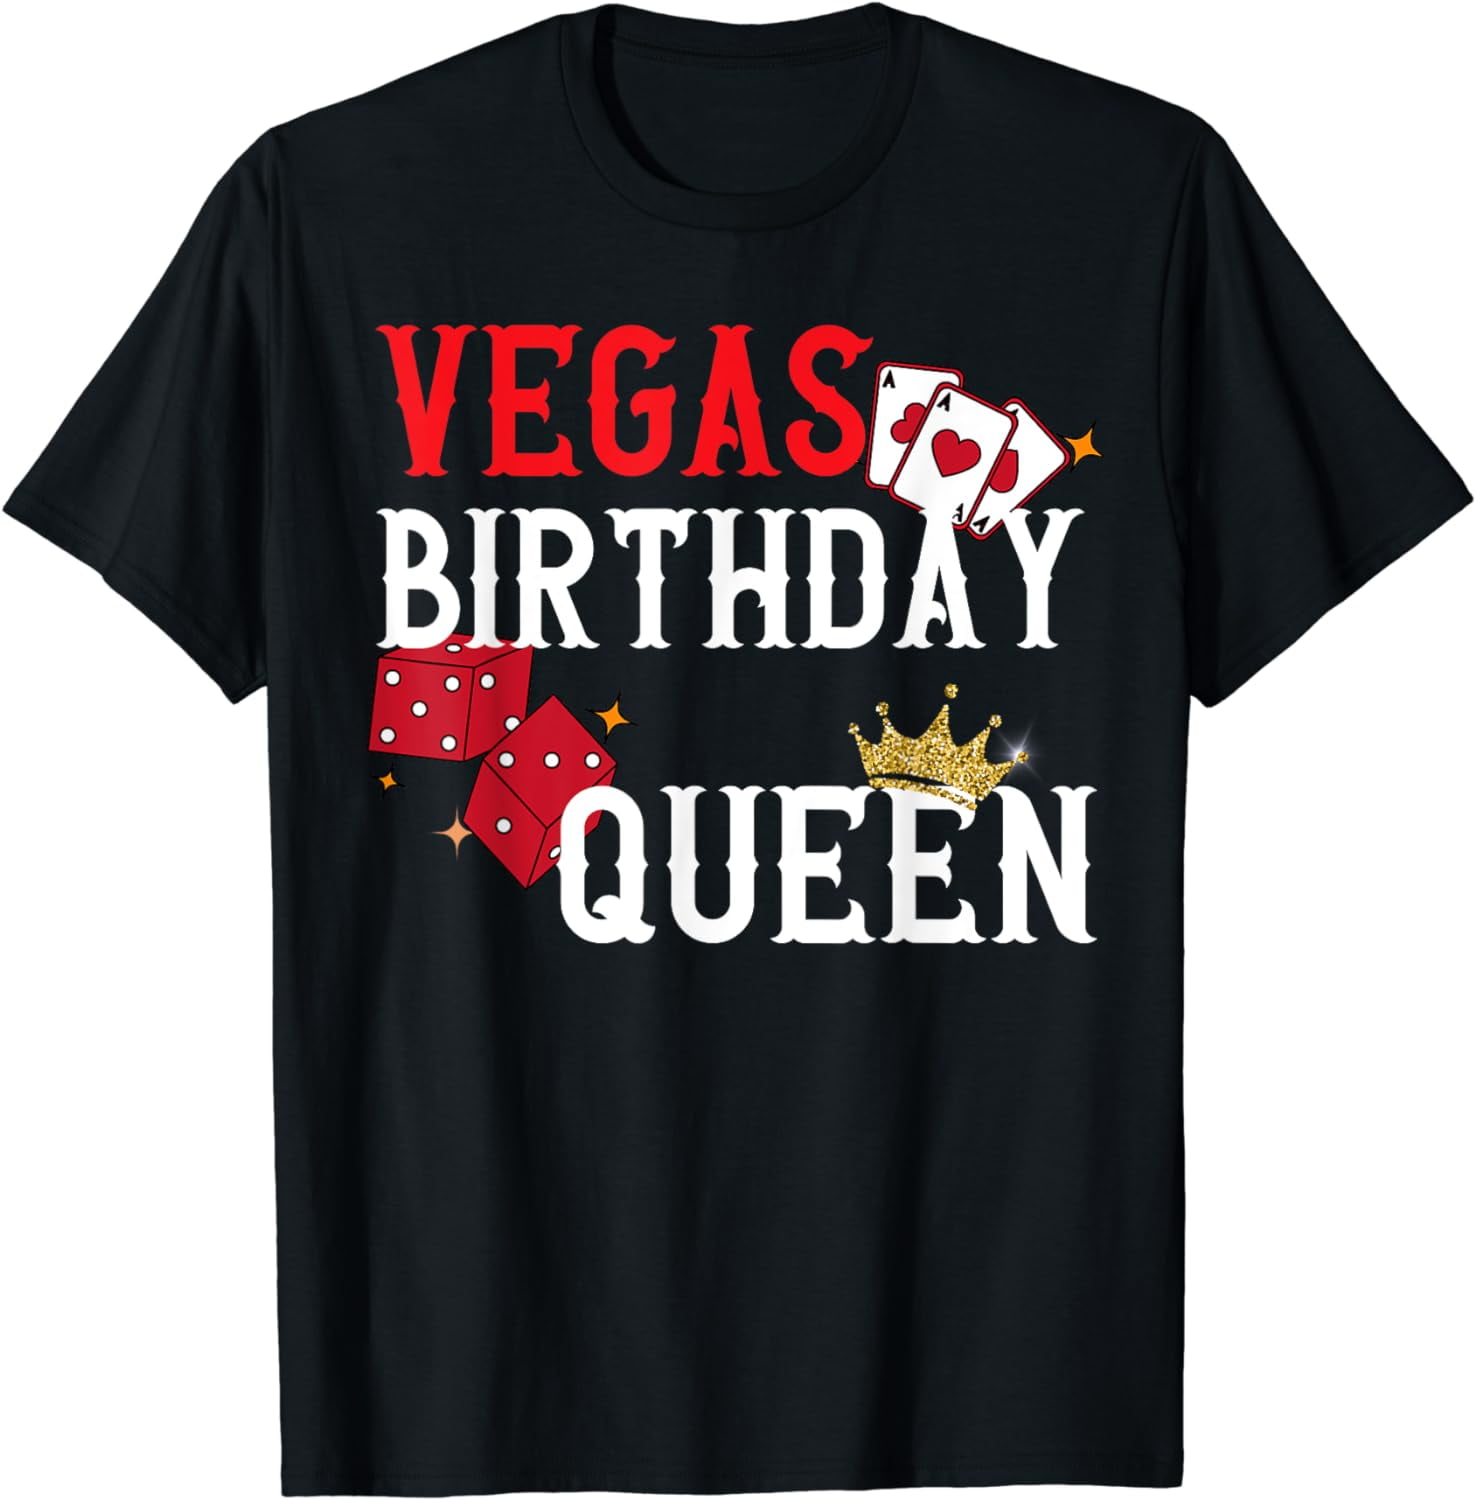 Vegas Birth Day Queen weekend Funny Vacation Matching Family T-Shirt ...